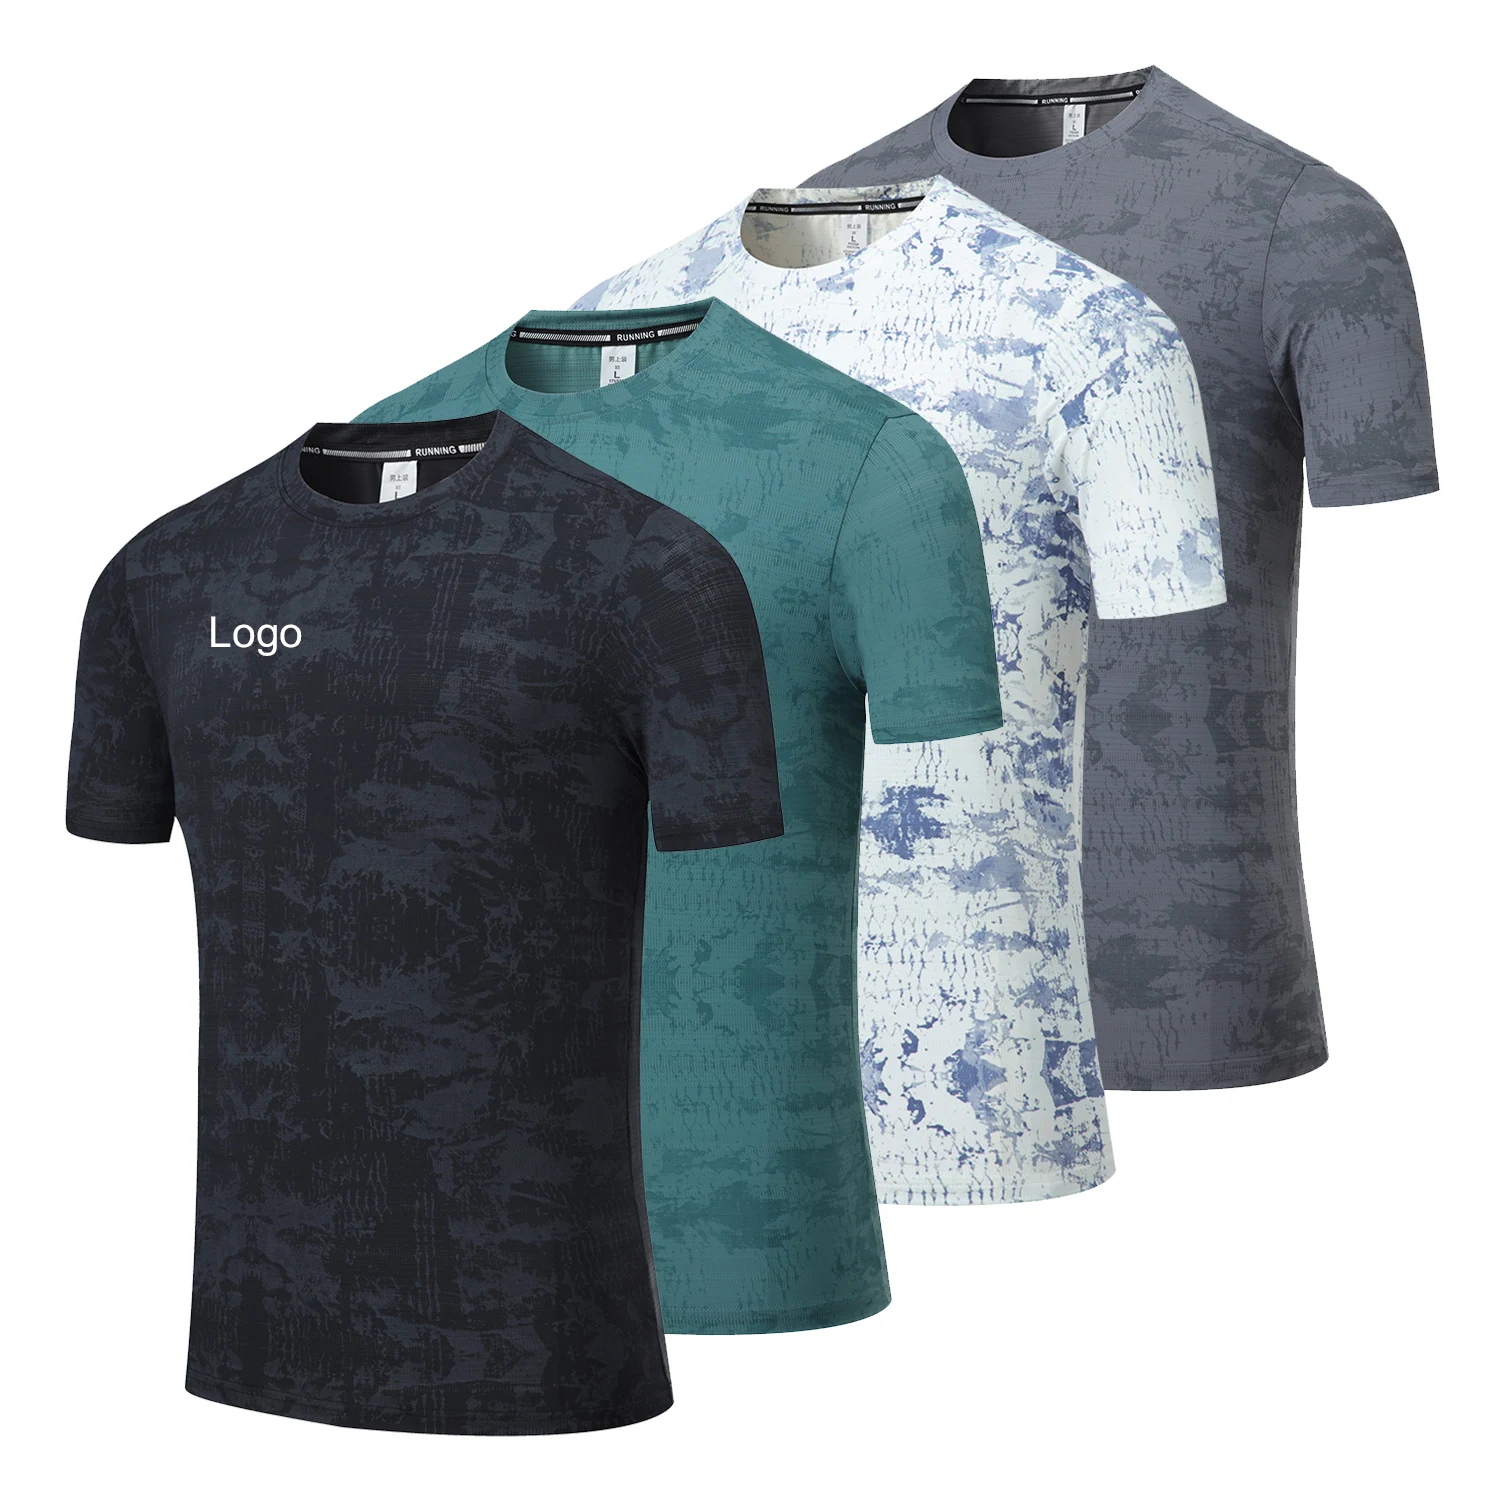 Under Armour-Breathable Sports Traning Gym Yoga Football-Sublimition T-Shirt 